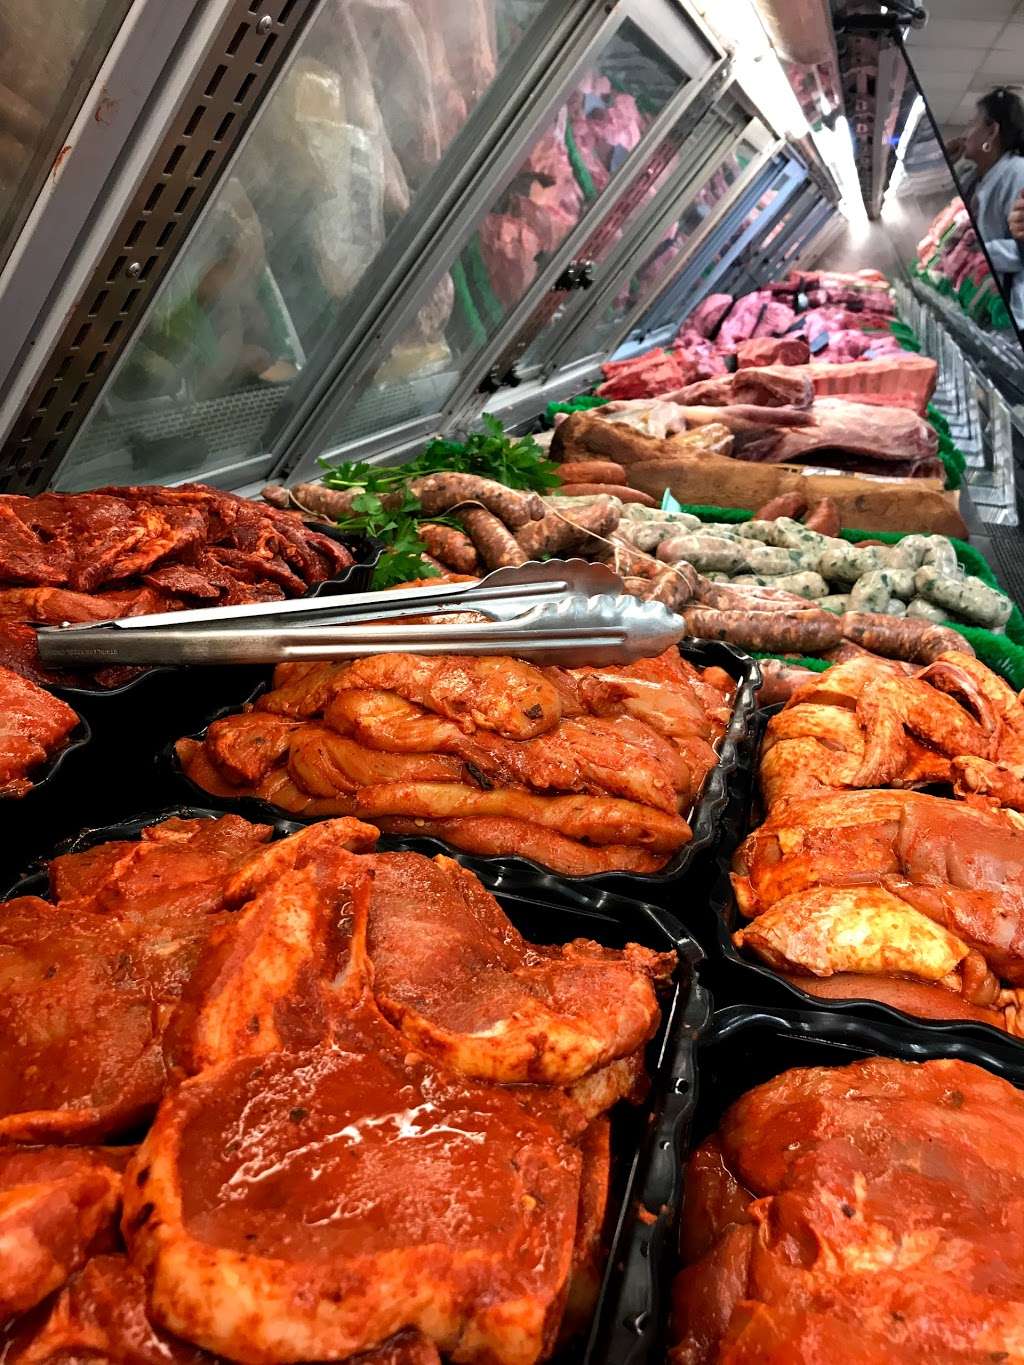 International Meat Market | 756 Lonsdale Ave, Central Falls, RI 02863 | Phone: (401) 728-9000